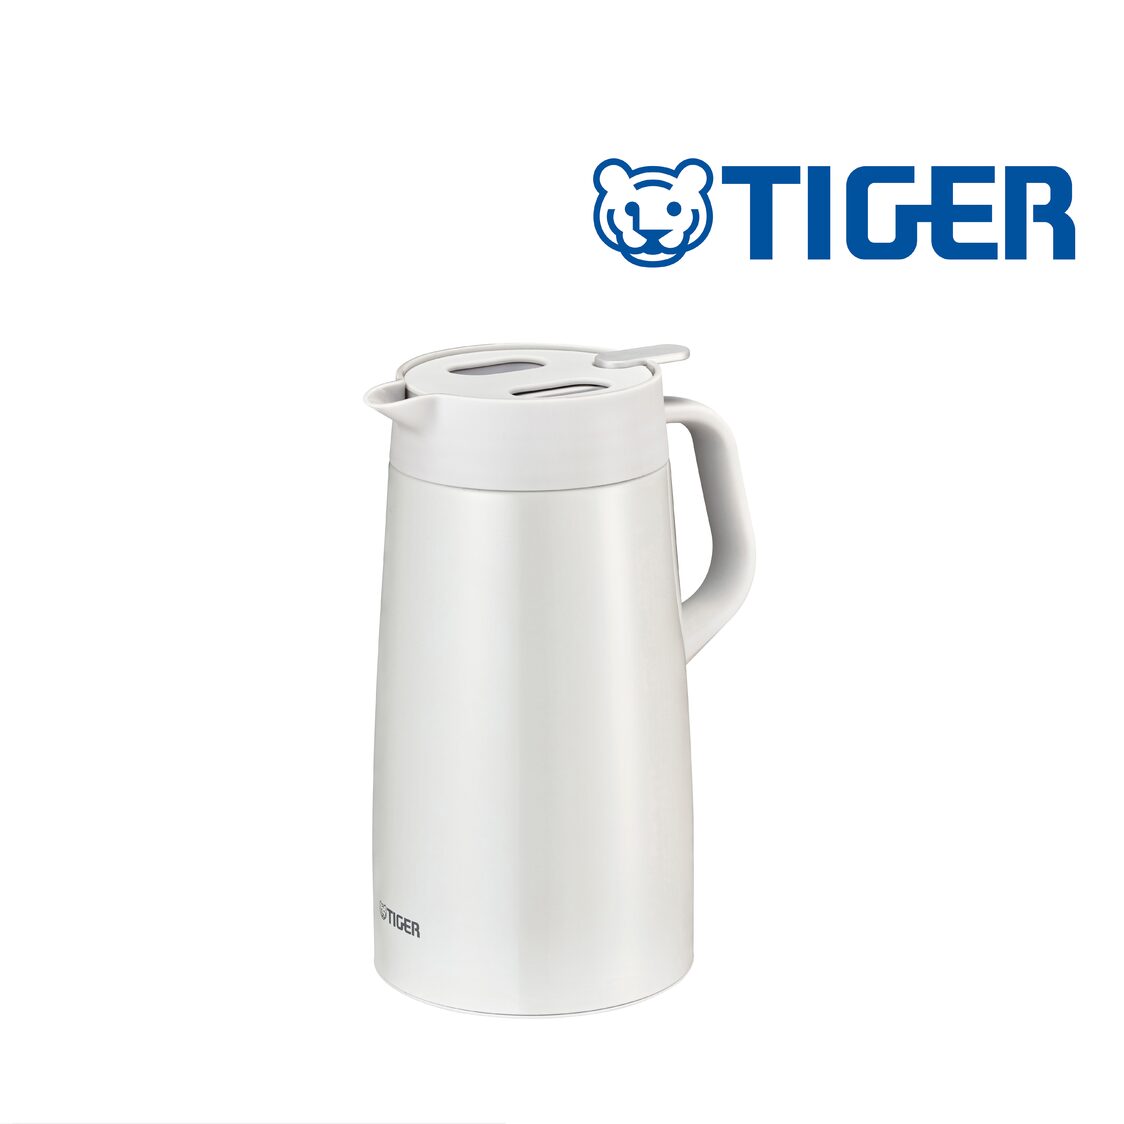 TIGER 16L Double Stainless Steel Handy Jug - White PWO-A160W